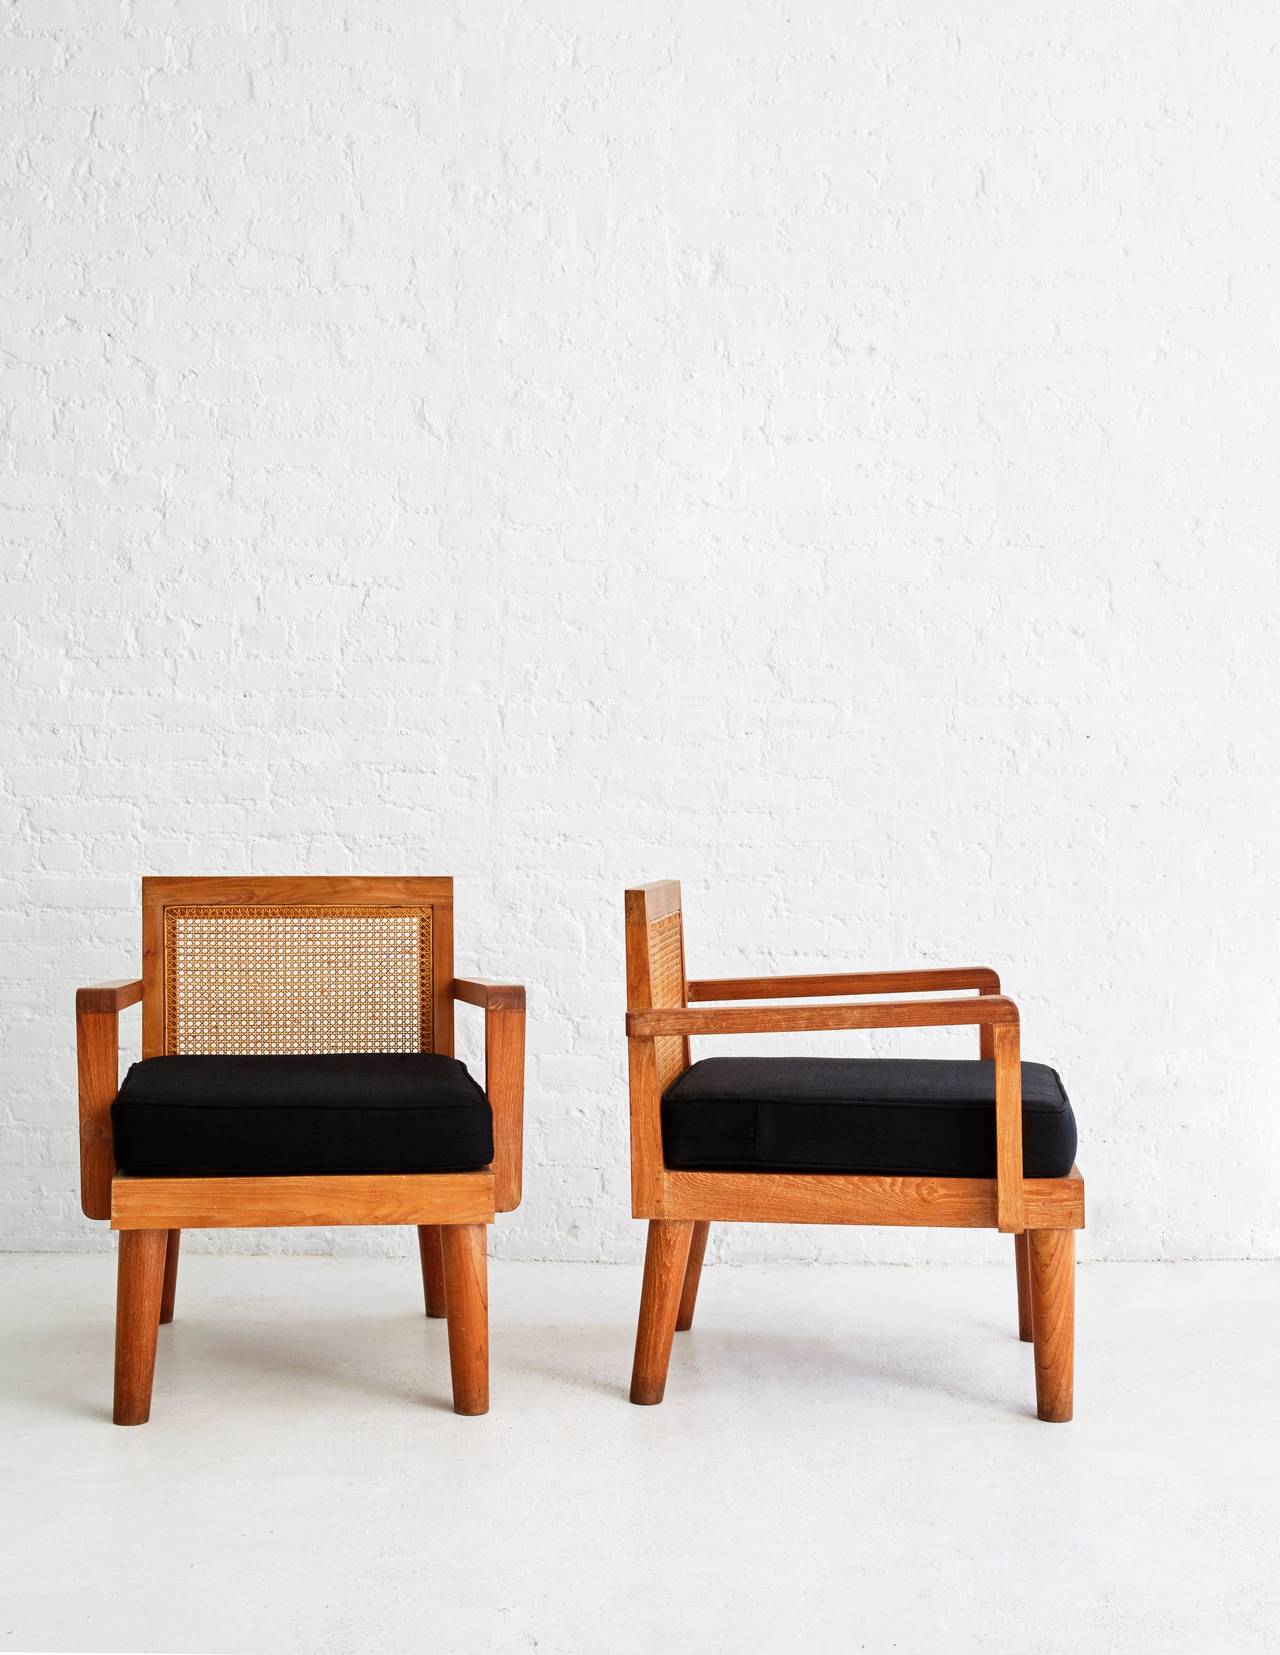 Unique pair of French teak and cane lounge chairs with red upholstered seat. 

Beautiful legs á la Charlotte Perriand and caning reminiscent of Pierre Jeanneret. 

c. 1950s.